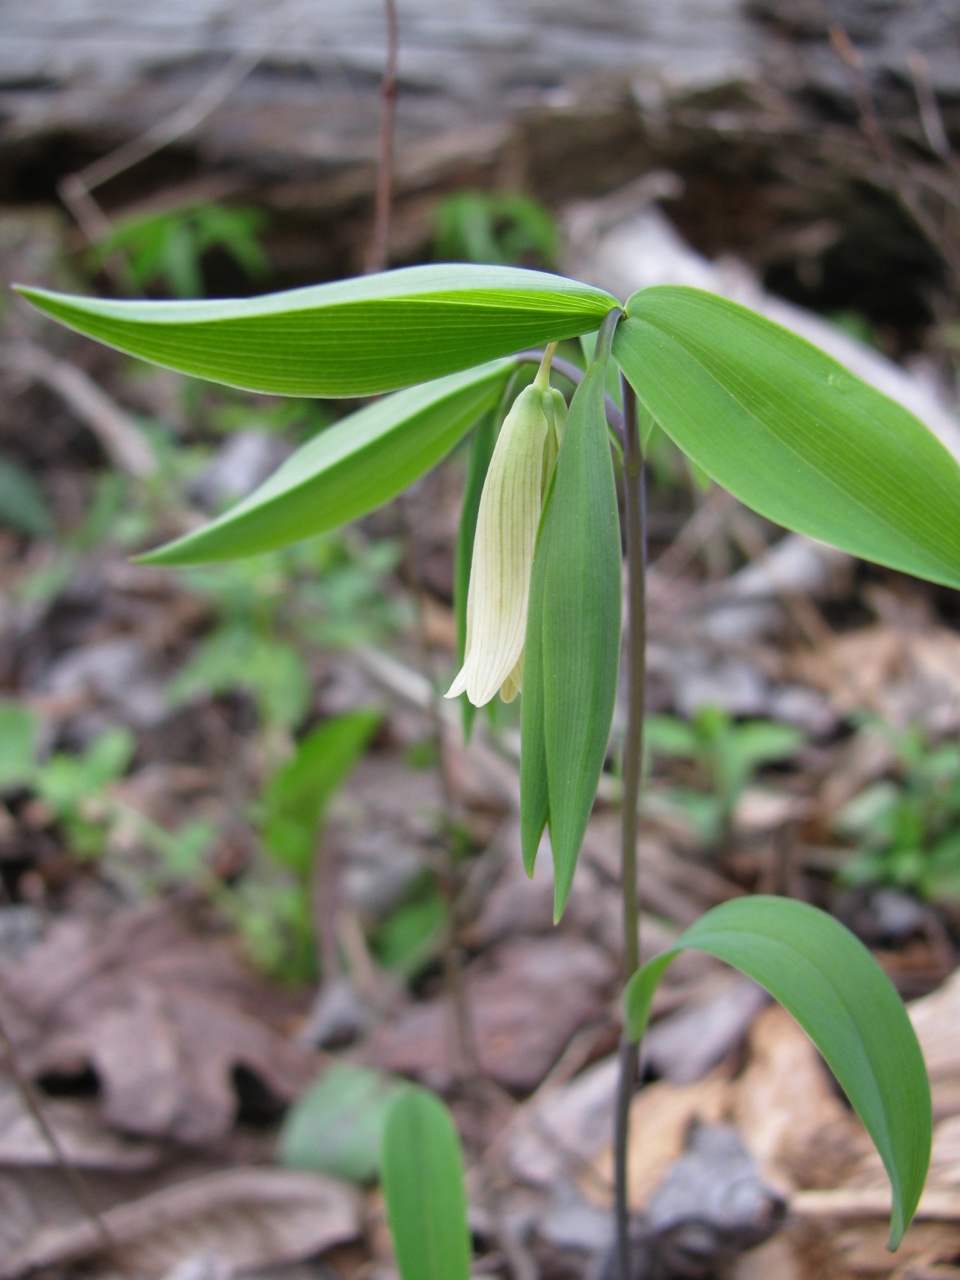 The Scientific Name is Uvularia sessilifolia. You will likely hear them called Bellwort, Straw-lily, Wild-oats, Mountain Bellwort. This picture shows the Flowering plant close-up. Notice the sessile and drooping leaves. U. puberula also has sessile leaves but they are strongly ascending. of Uvularia sessilifolia